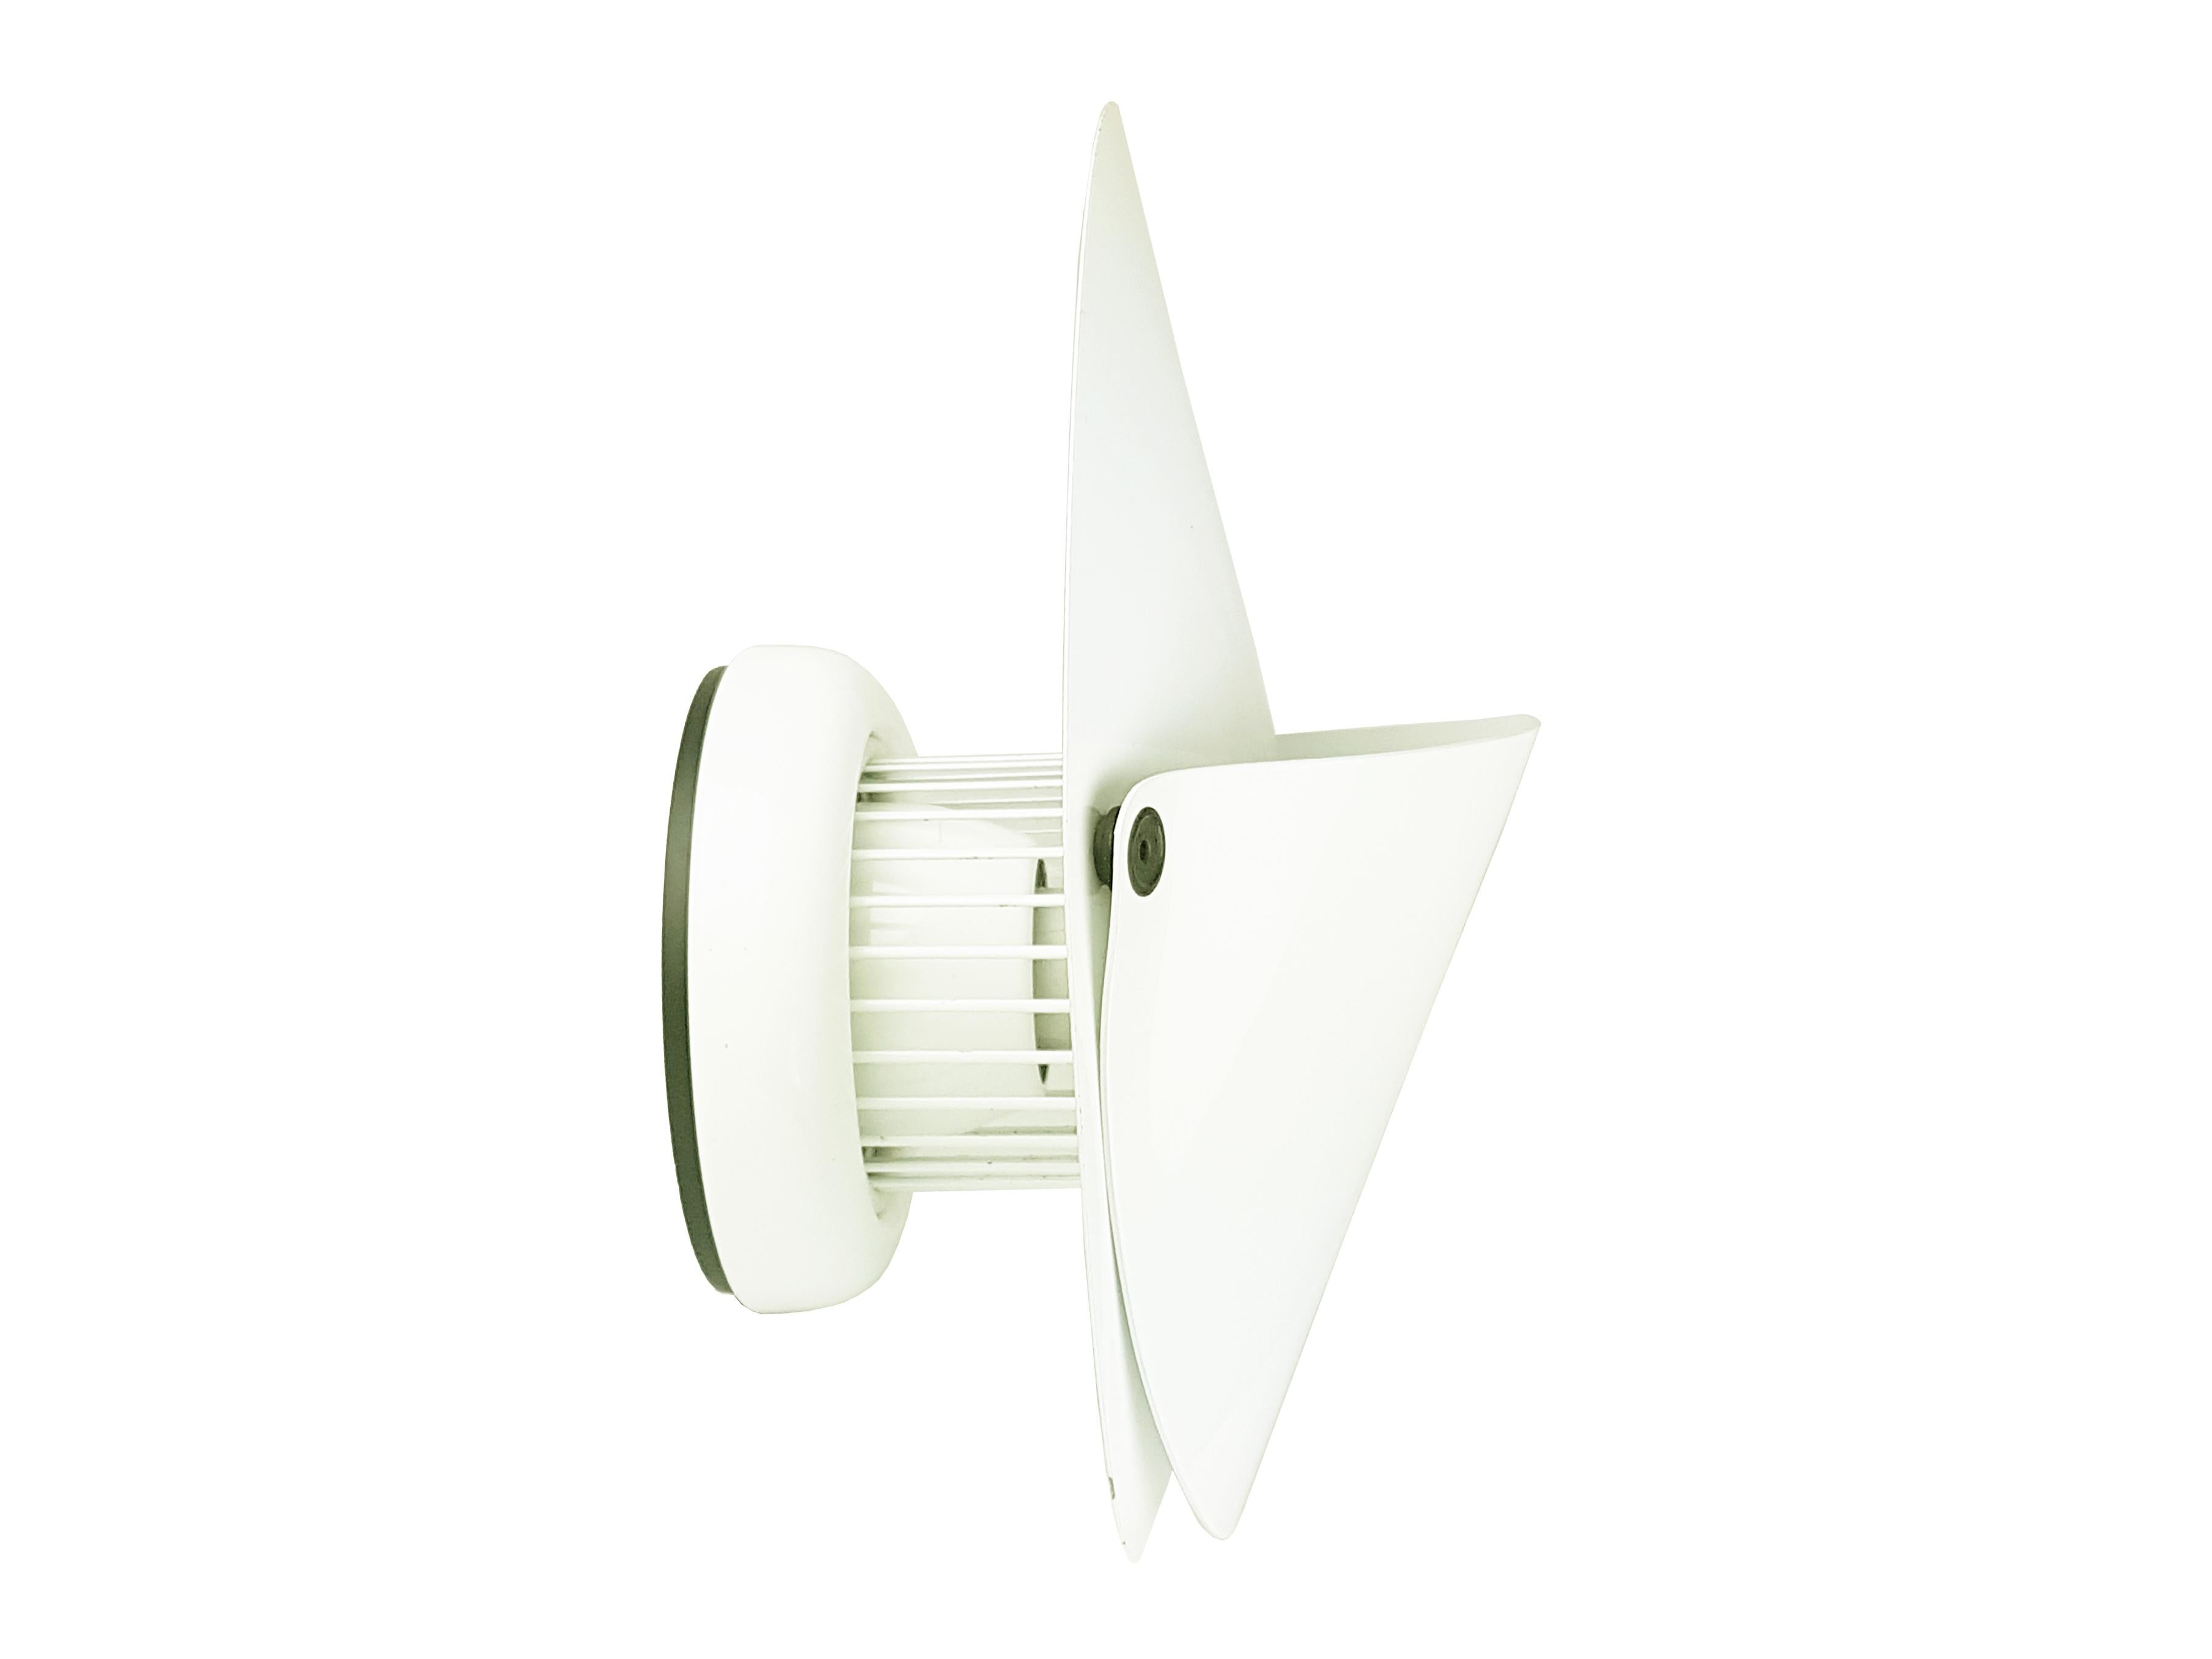 Pair of wall lamps mod. Giovi, designed by Achille Castiglioni in 1976 and produced by Flos. White metal & aluminum structure with rubber stop. The front lampshade is applied to the main body of the lamp through 2 snaps.
This lamp, once turned on,